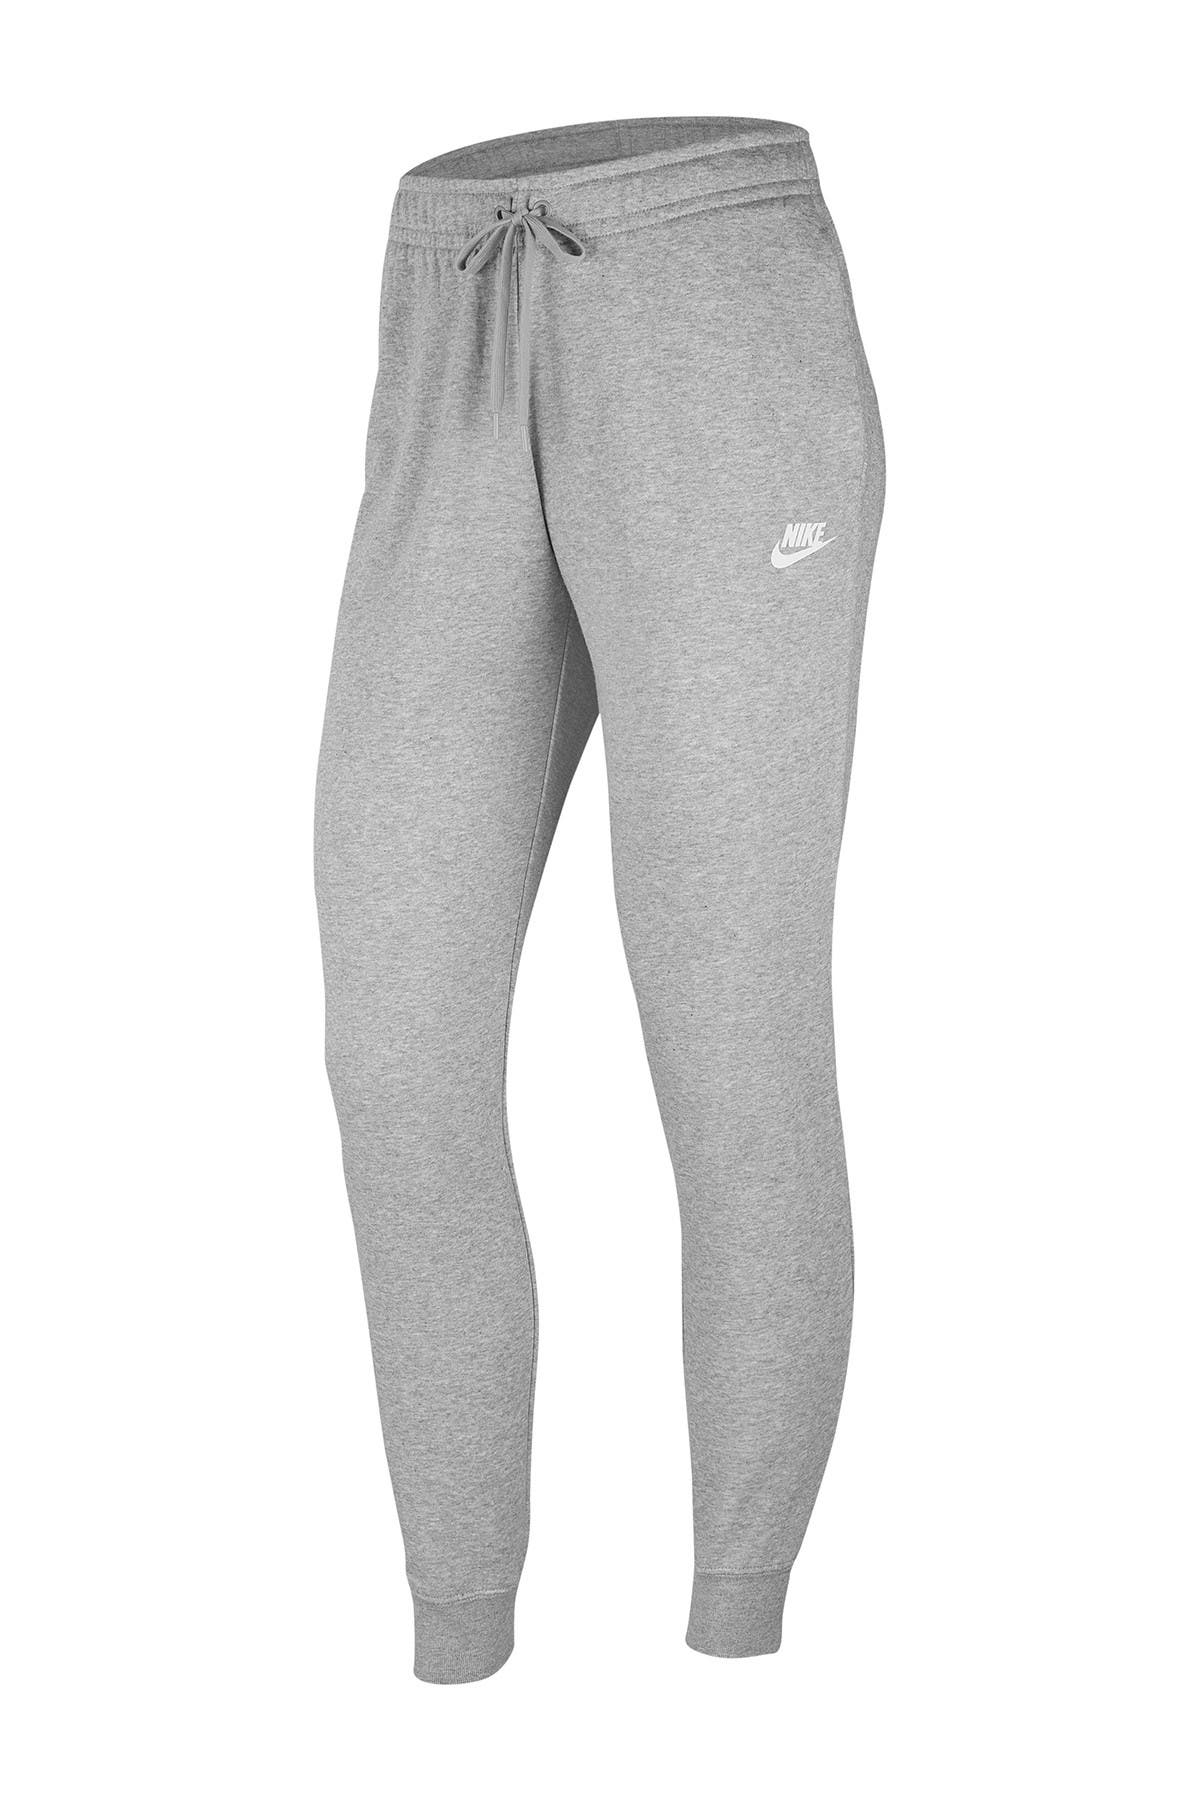 nike cute womens workout clothes